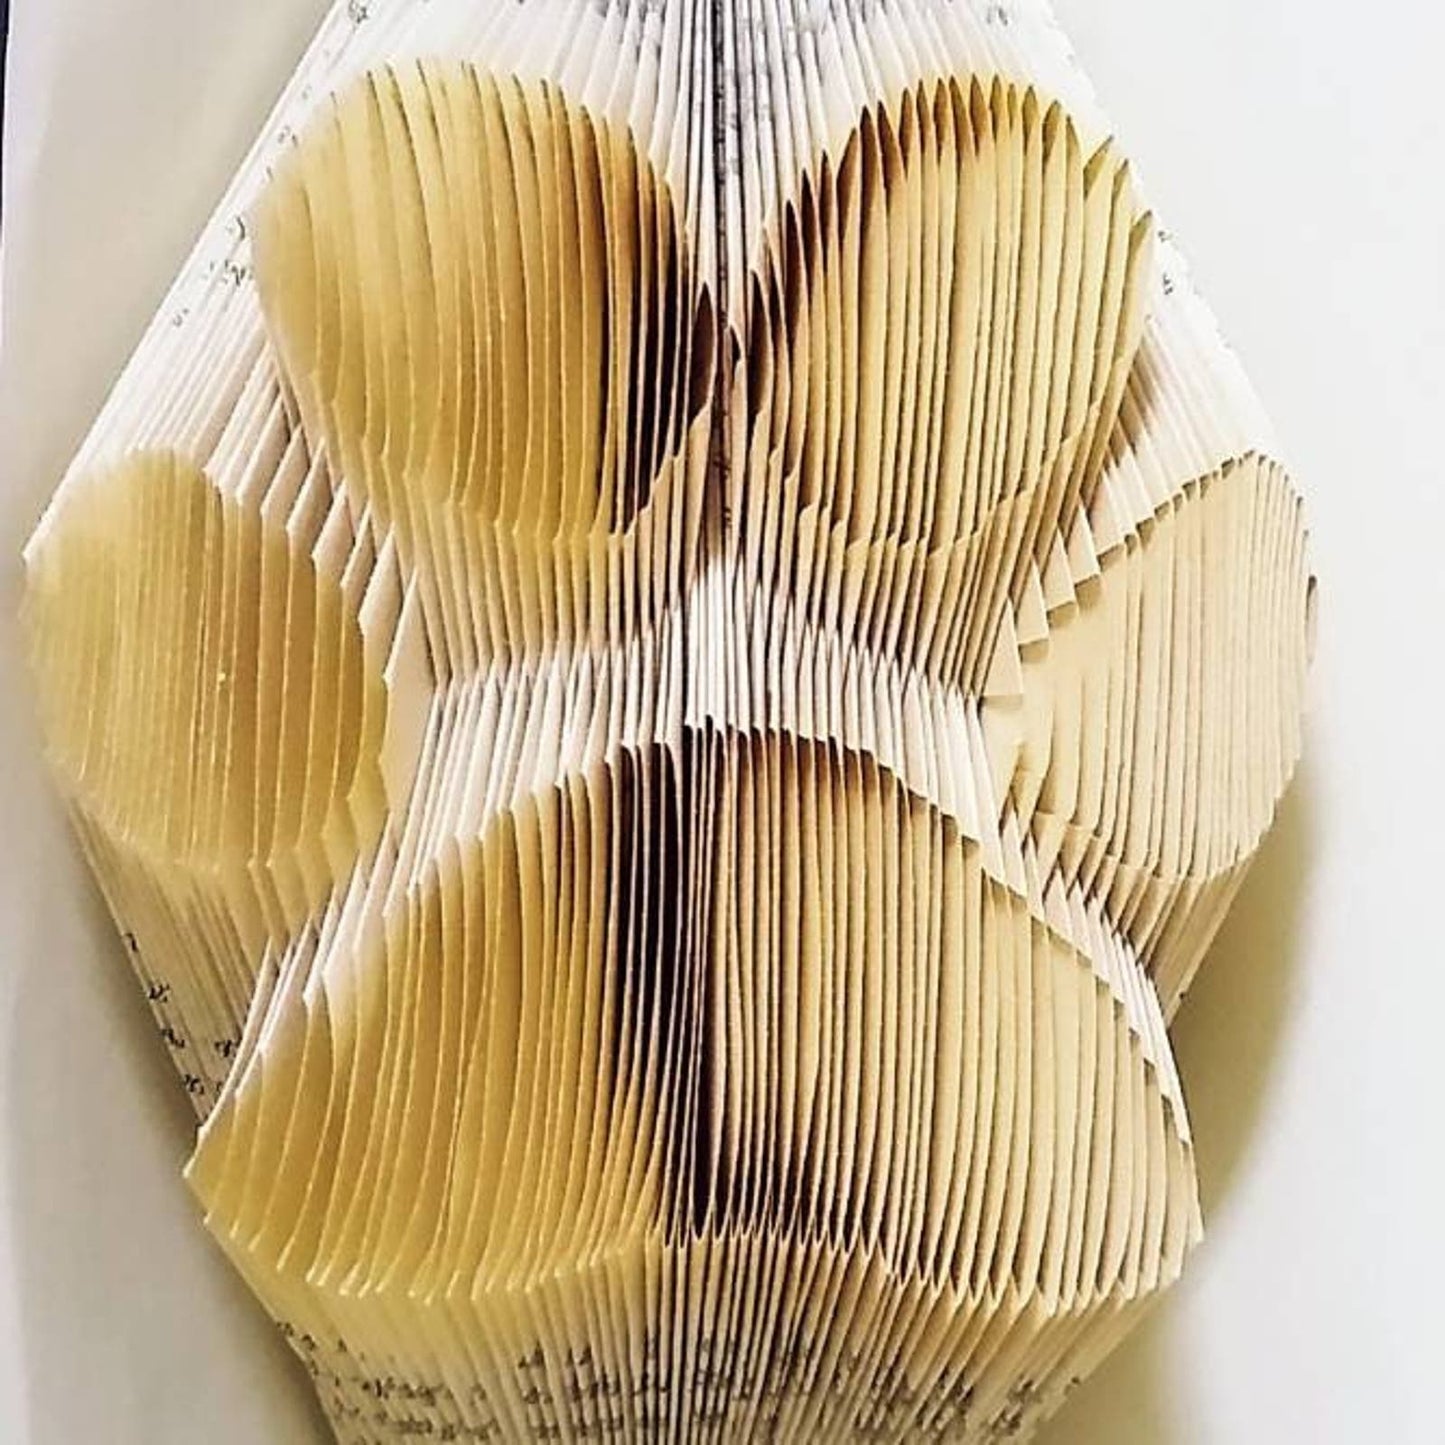 Folded Book Art, Paw Print, Cat Lover Gift, Dog Owner Present, Pet Home Decor